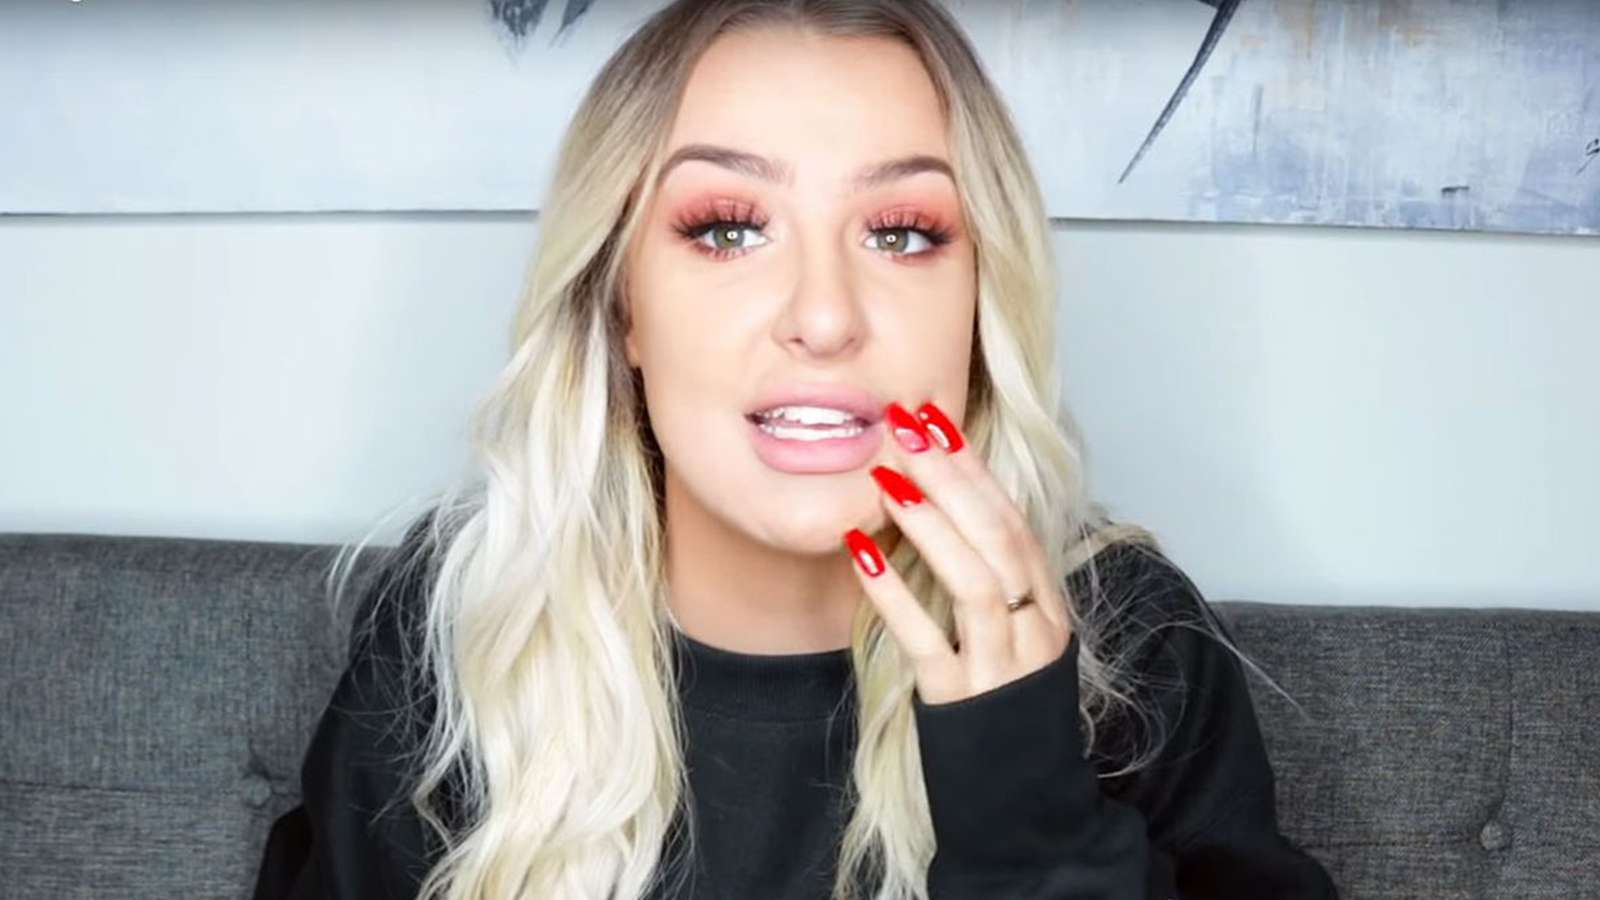 Tana Mongeau filming a video for her YouTube channel.